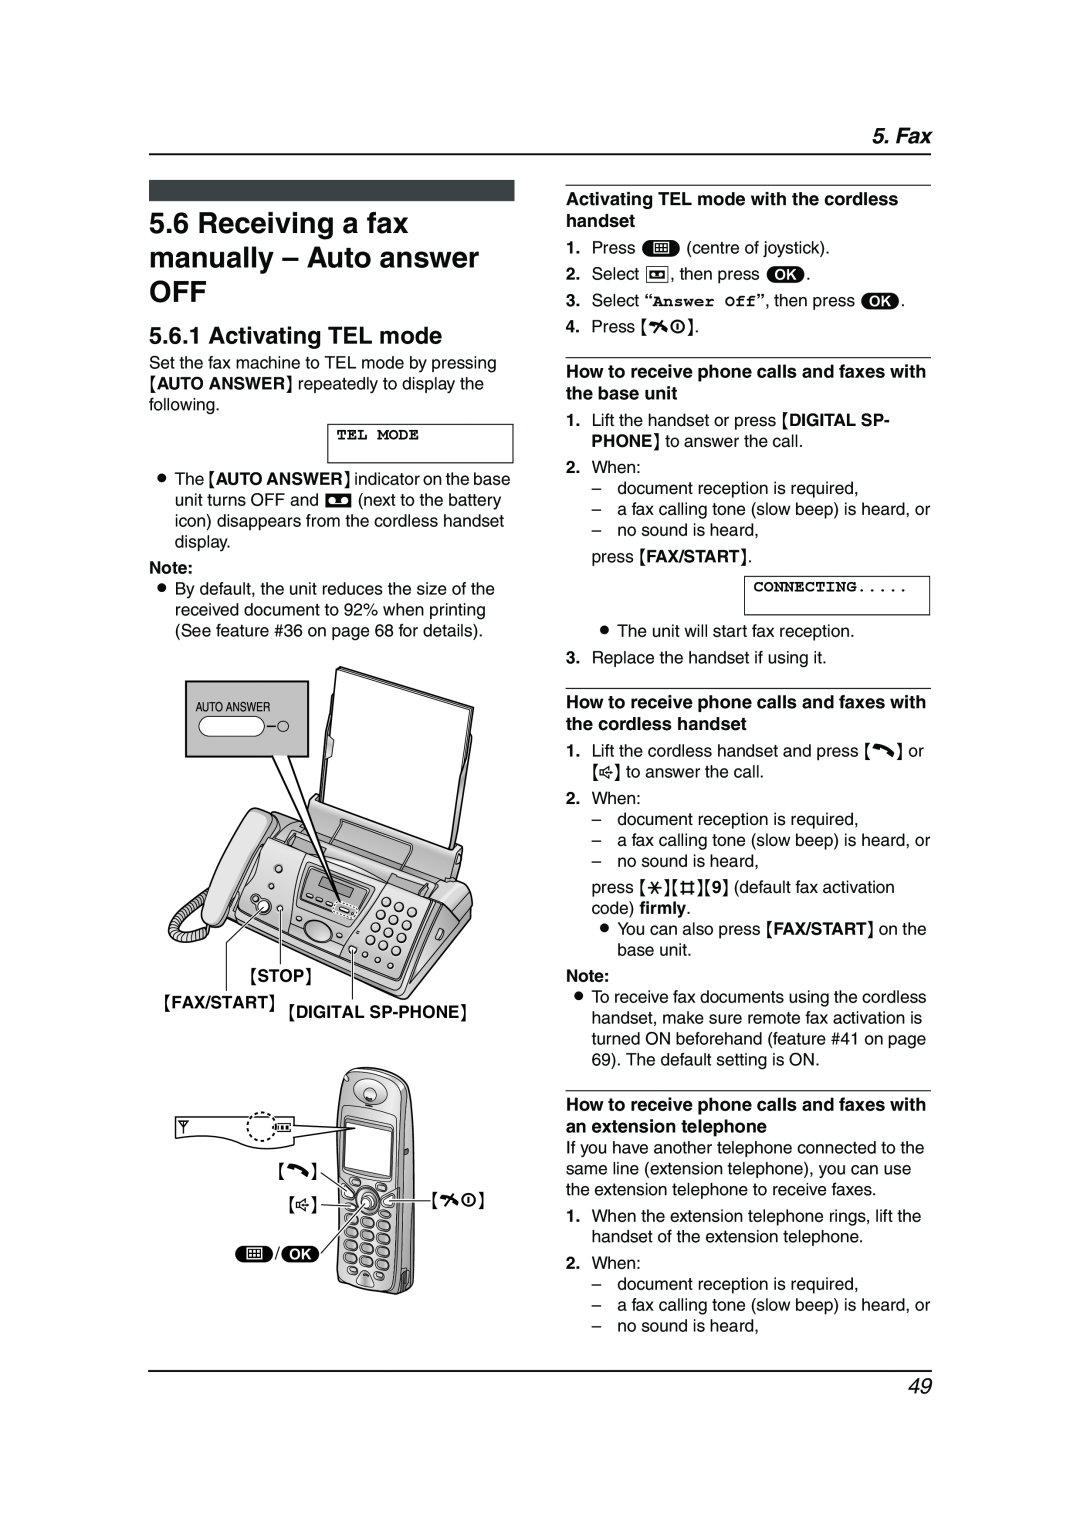 Panasonic KX-FC241AL Receiving a fax manually - Auto answer OFF, Activating TEL mode, Stop Fax/Start Digital Sp-Phone 